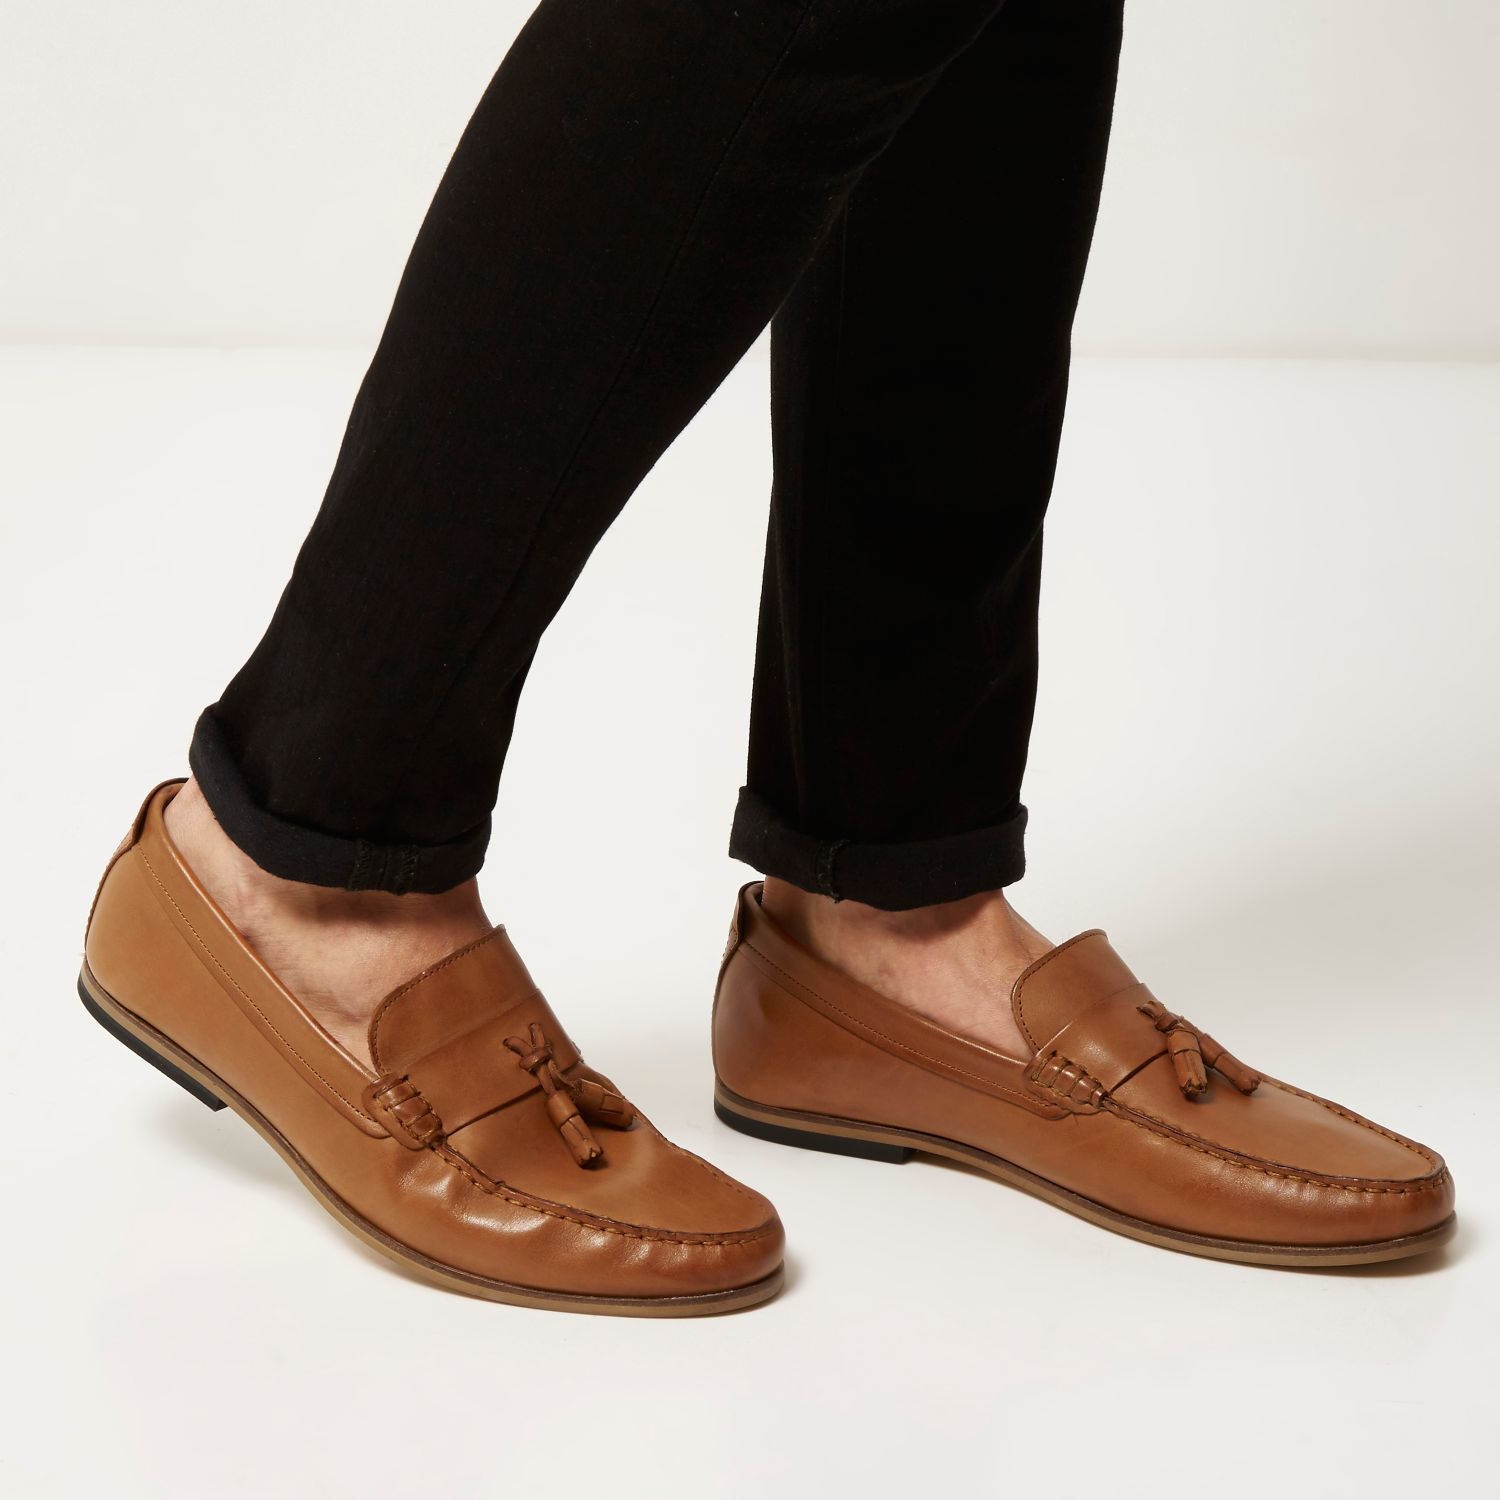 Lyst - River Island Tan Brown Leather Tassel Loafers in Brown for Men